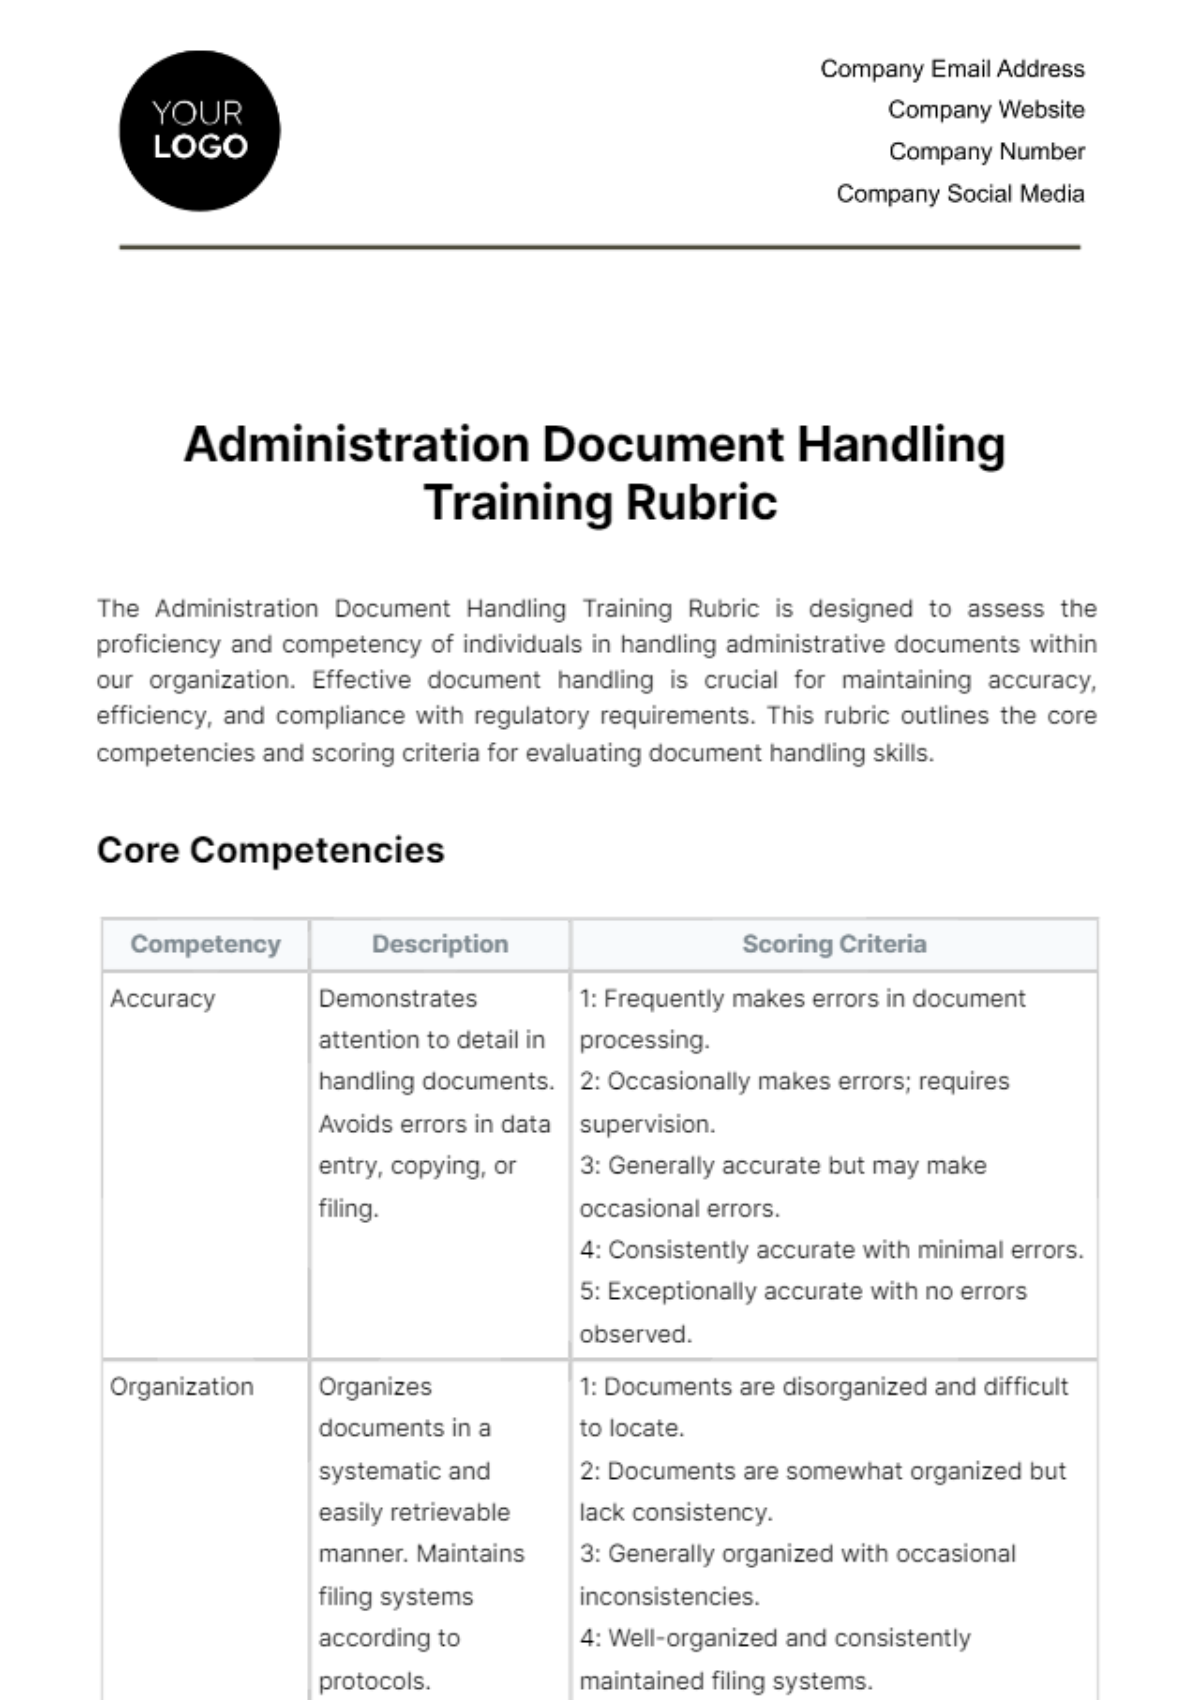 Free Administration Document Handling Training Rubric Template